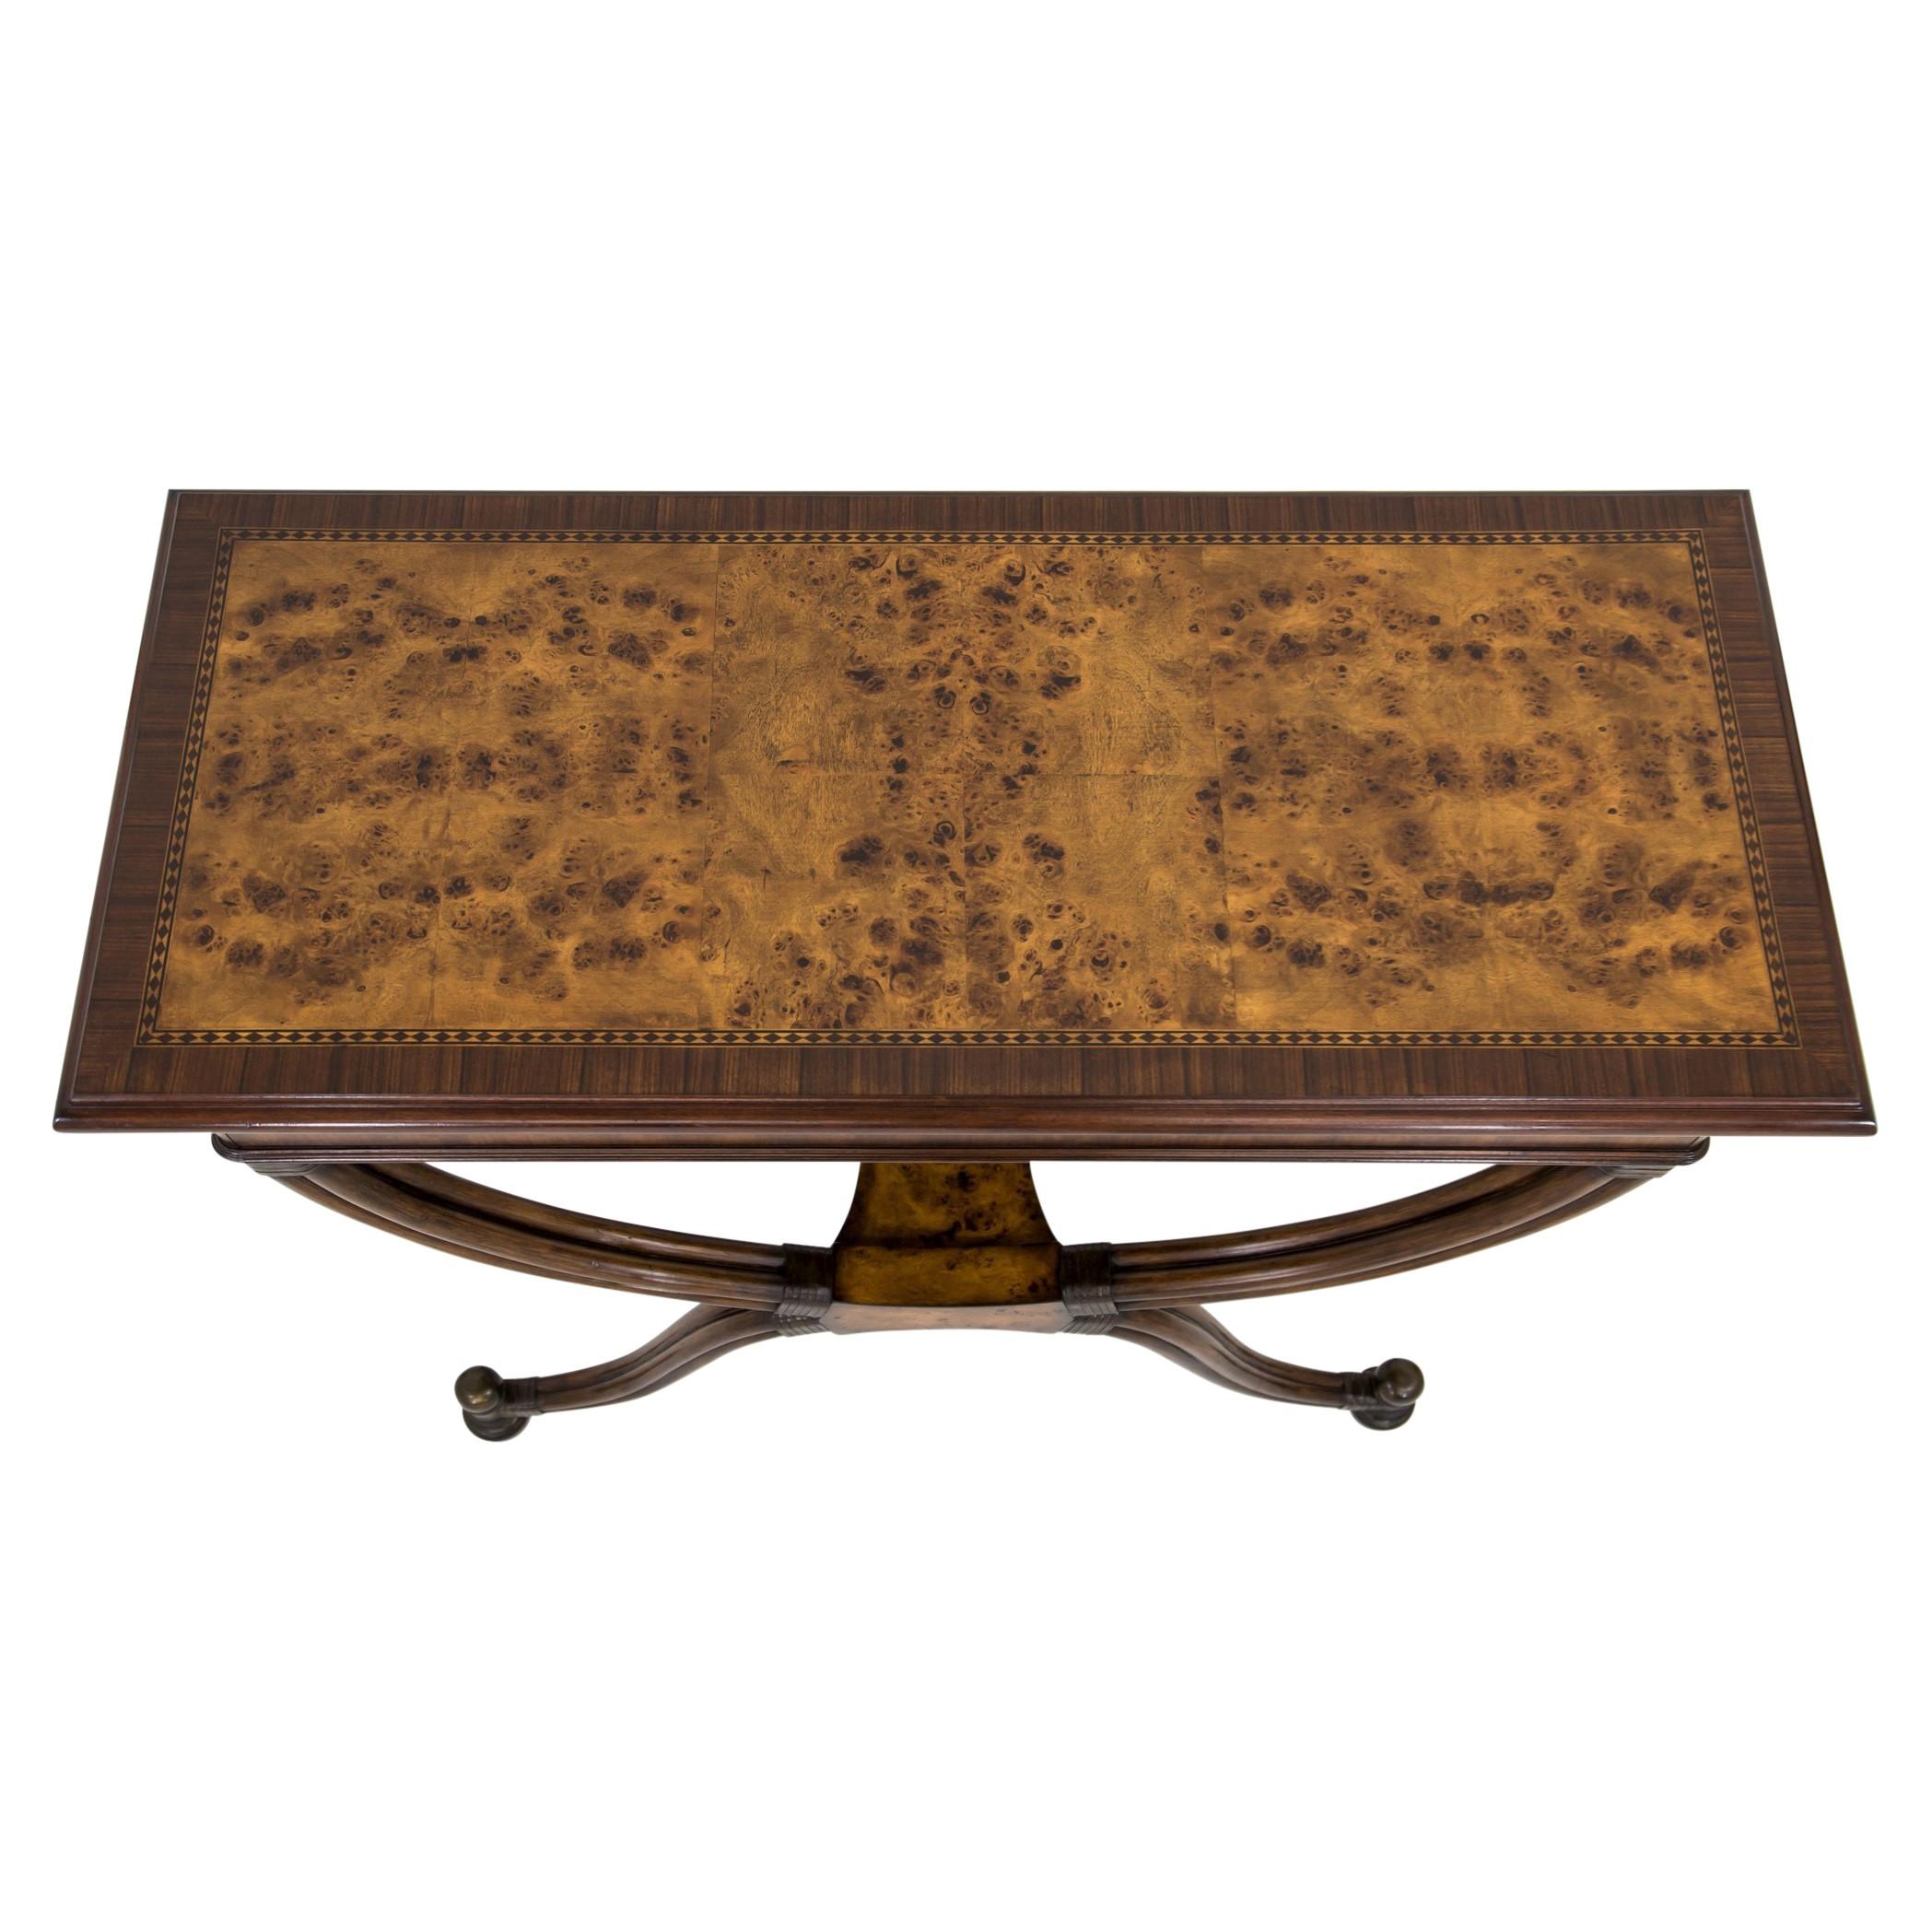 Early 20th century server, hall or console table with burlwood top surface edged in intricate inlay and macassar ebony. The cerule-like curved legs are made up of four tapered bentwood rods joined together and wrapped at each end with leather laces.